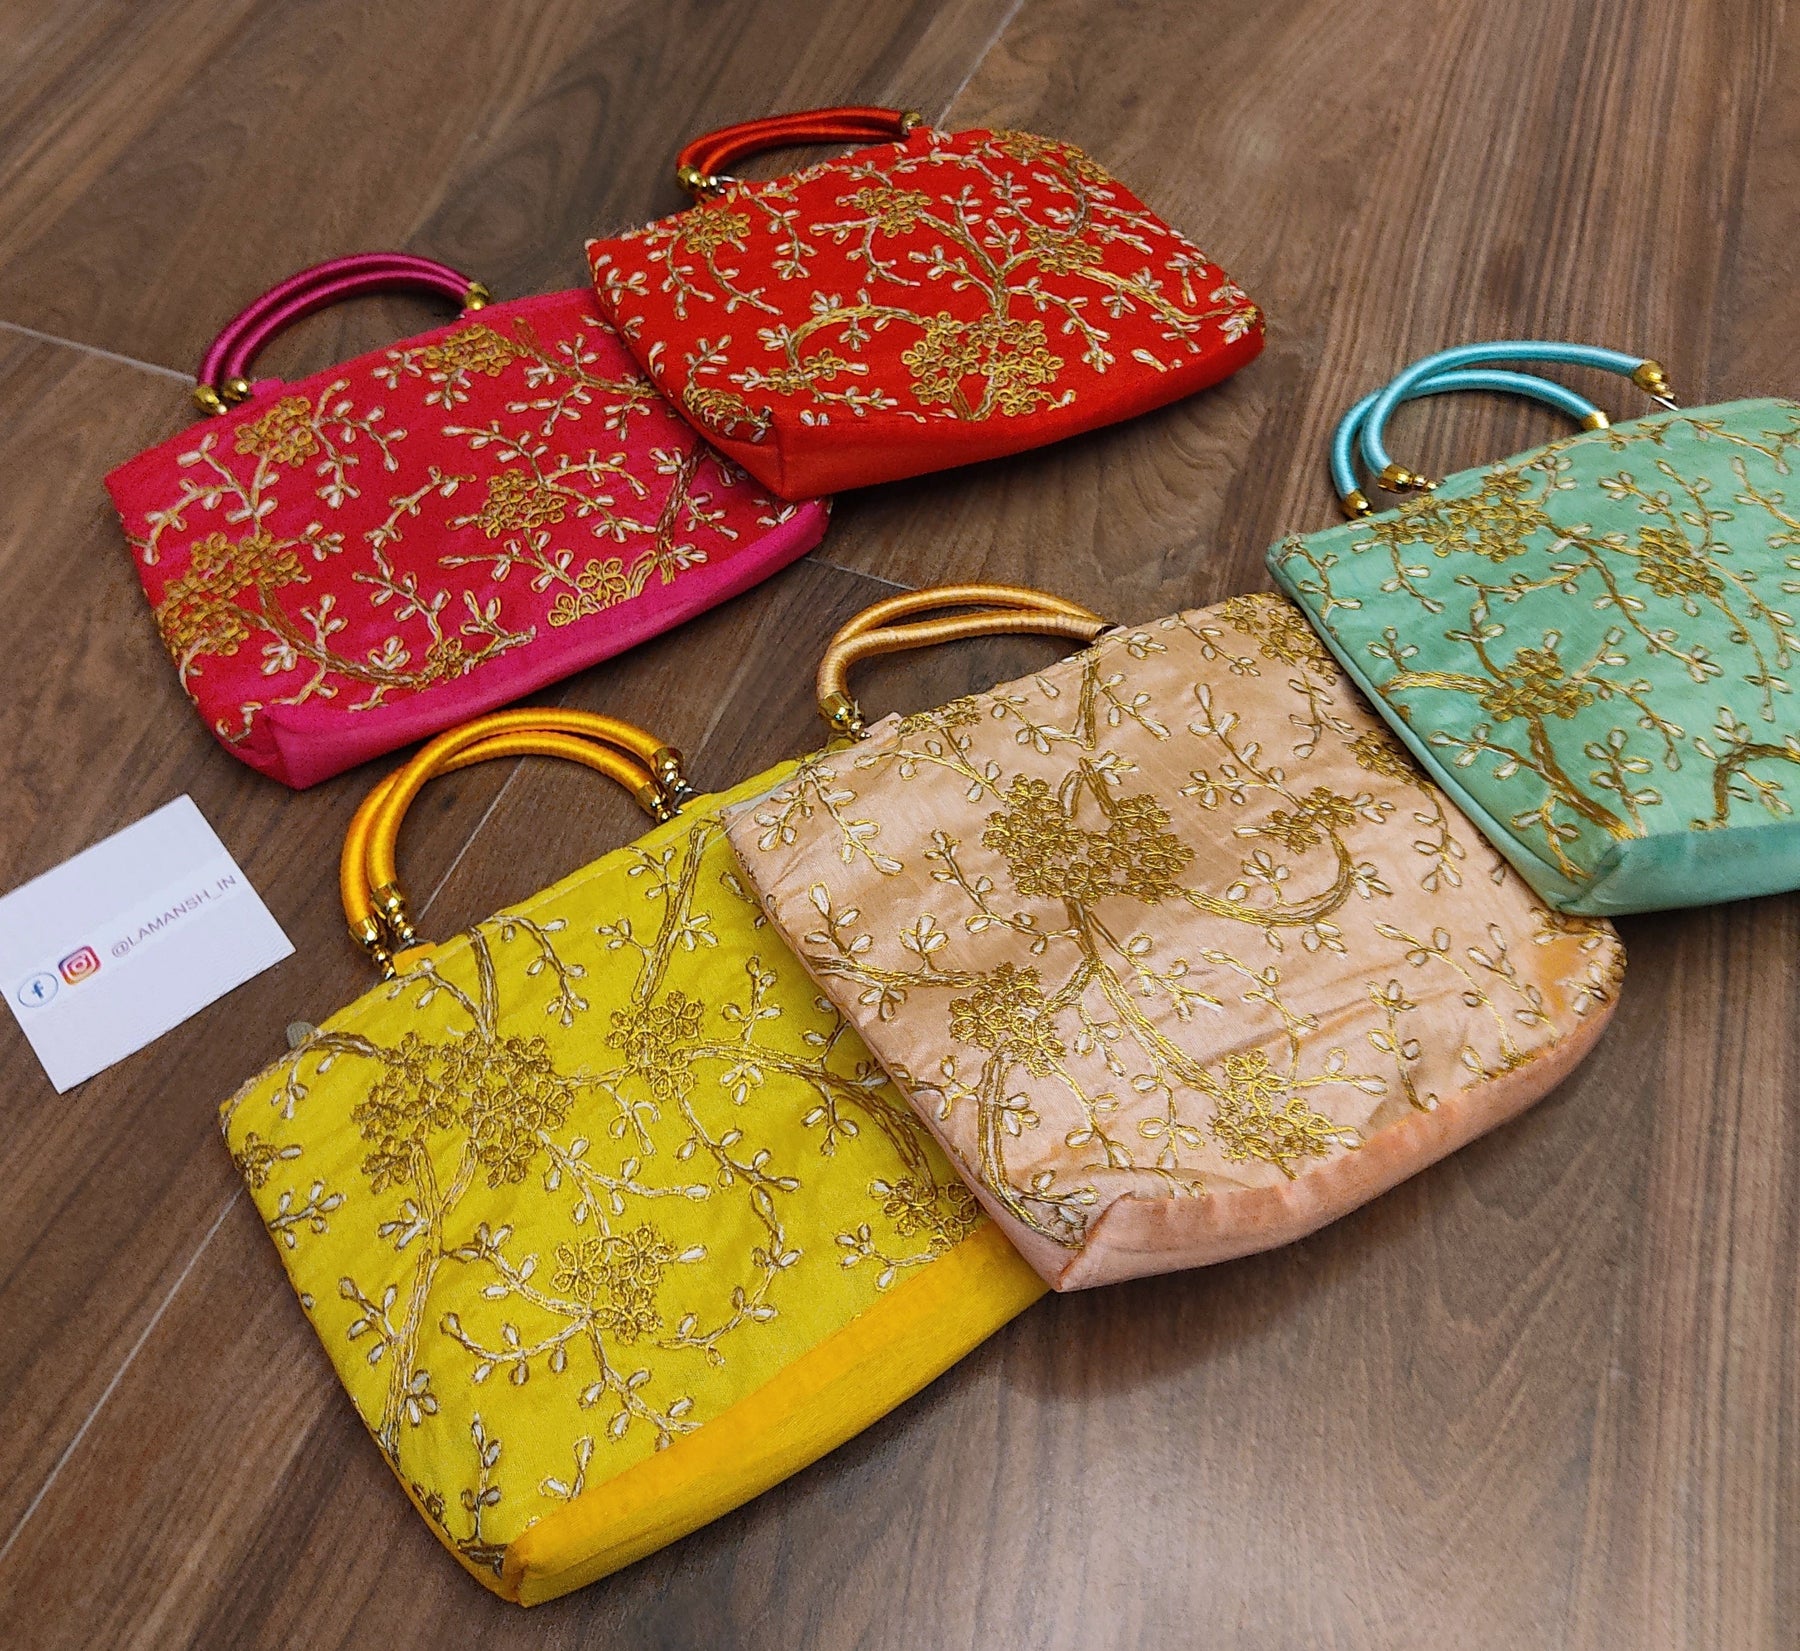 90 rs each on buying in bulk call at 8619550223 gift bags lamansh 9x7 inches embroidered fabric purse designer hand bags with handle for women best gifts favours option for wedding fe aed59d4d 858f 4d2c 9027